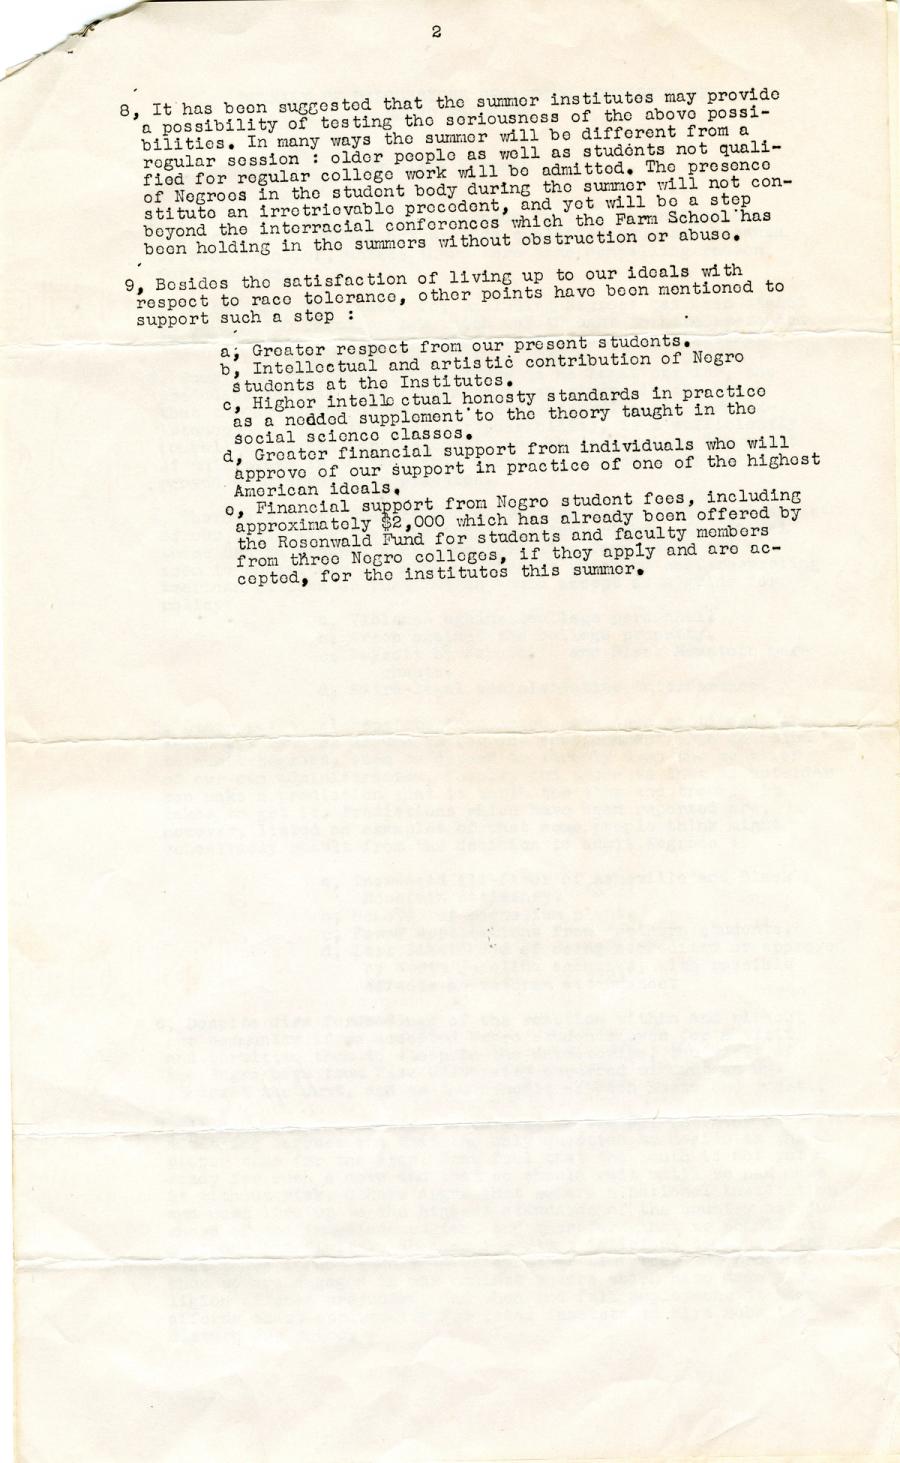 "Summary of Discussions Regarding Admission of Negro Students" written by Clark Foreman, page 2.